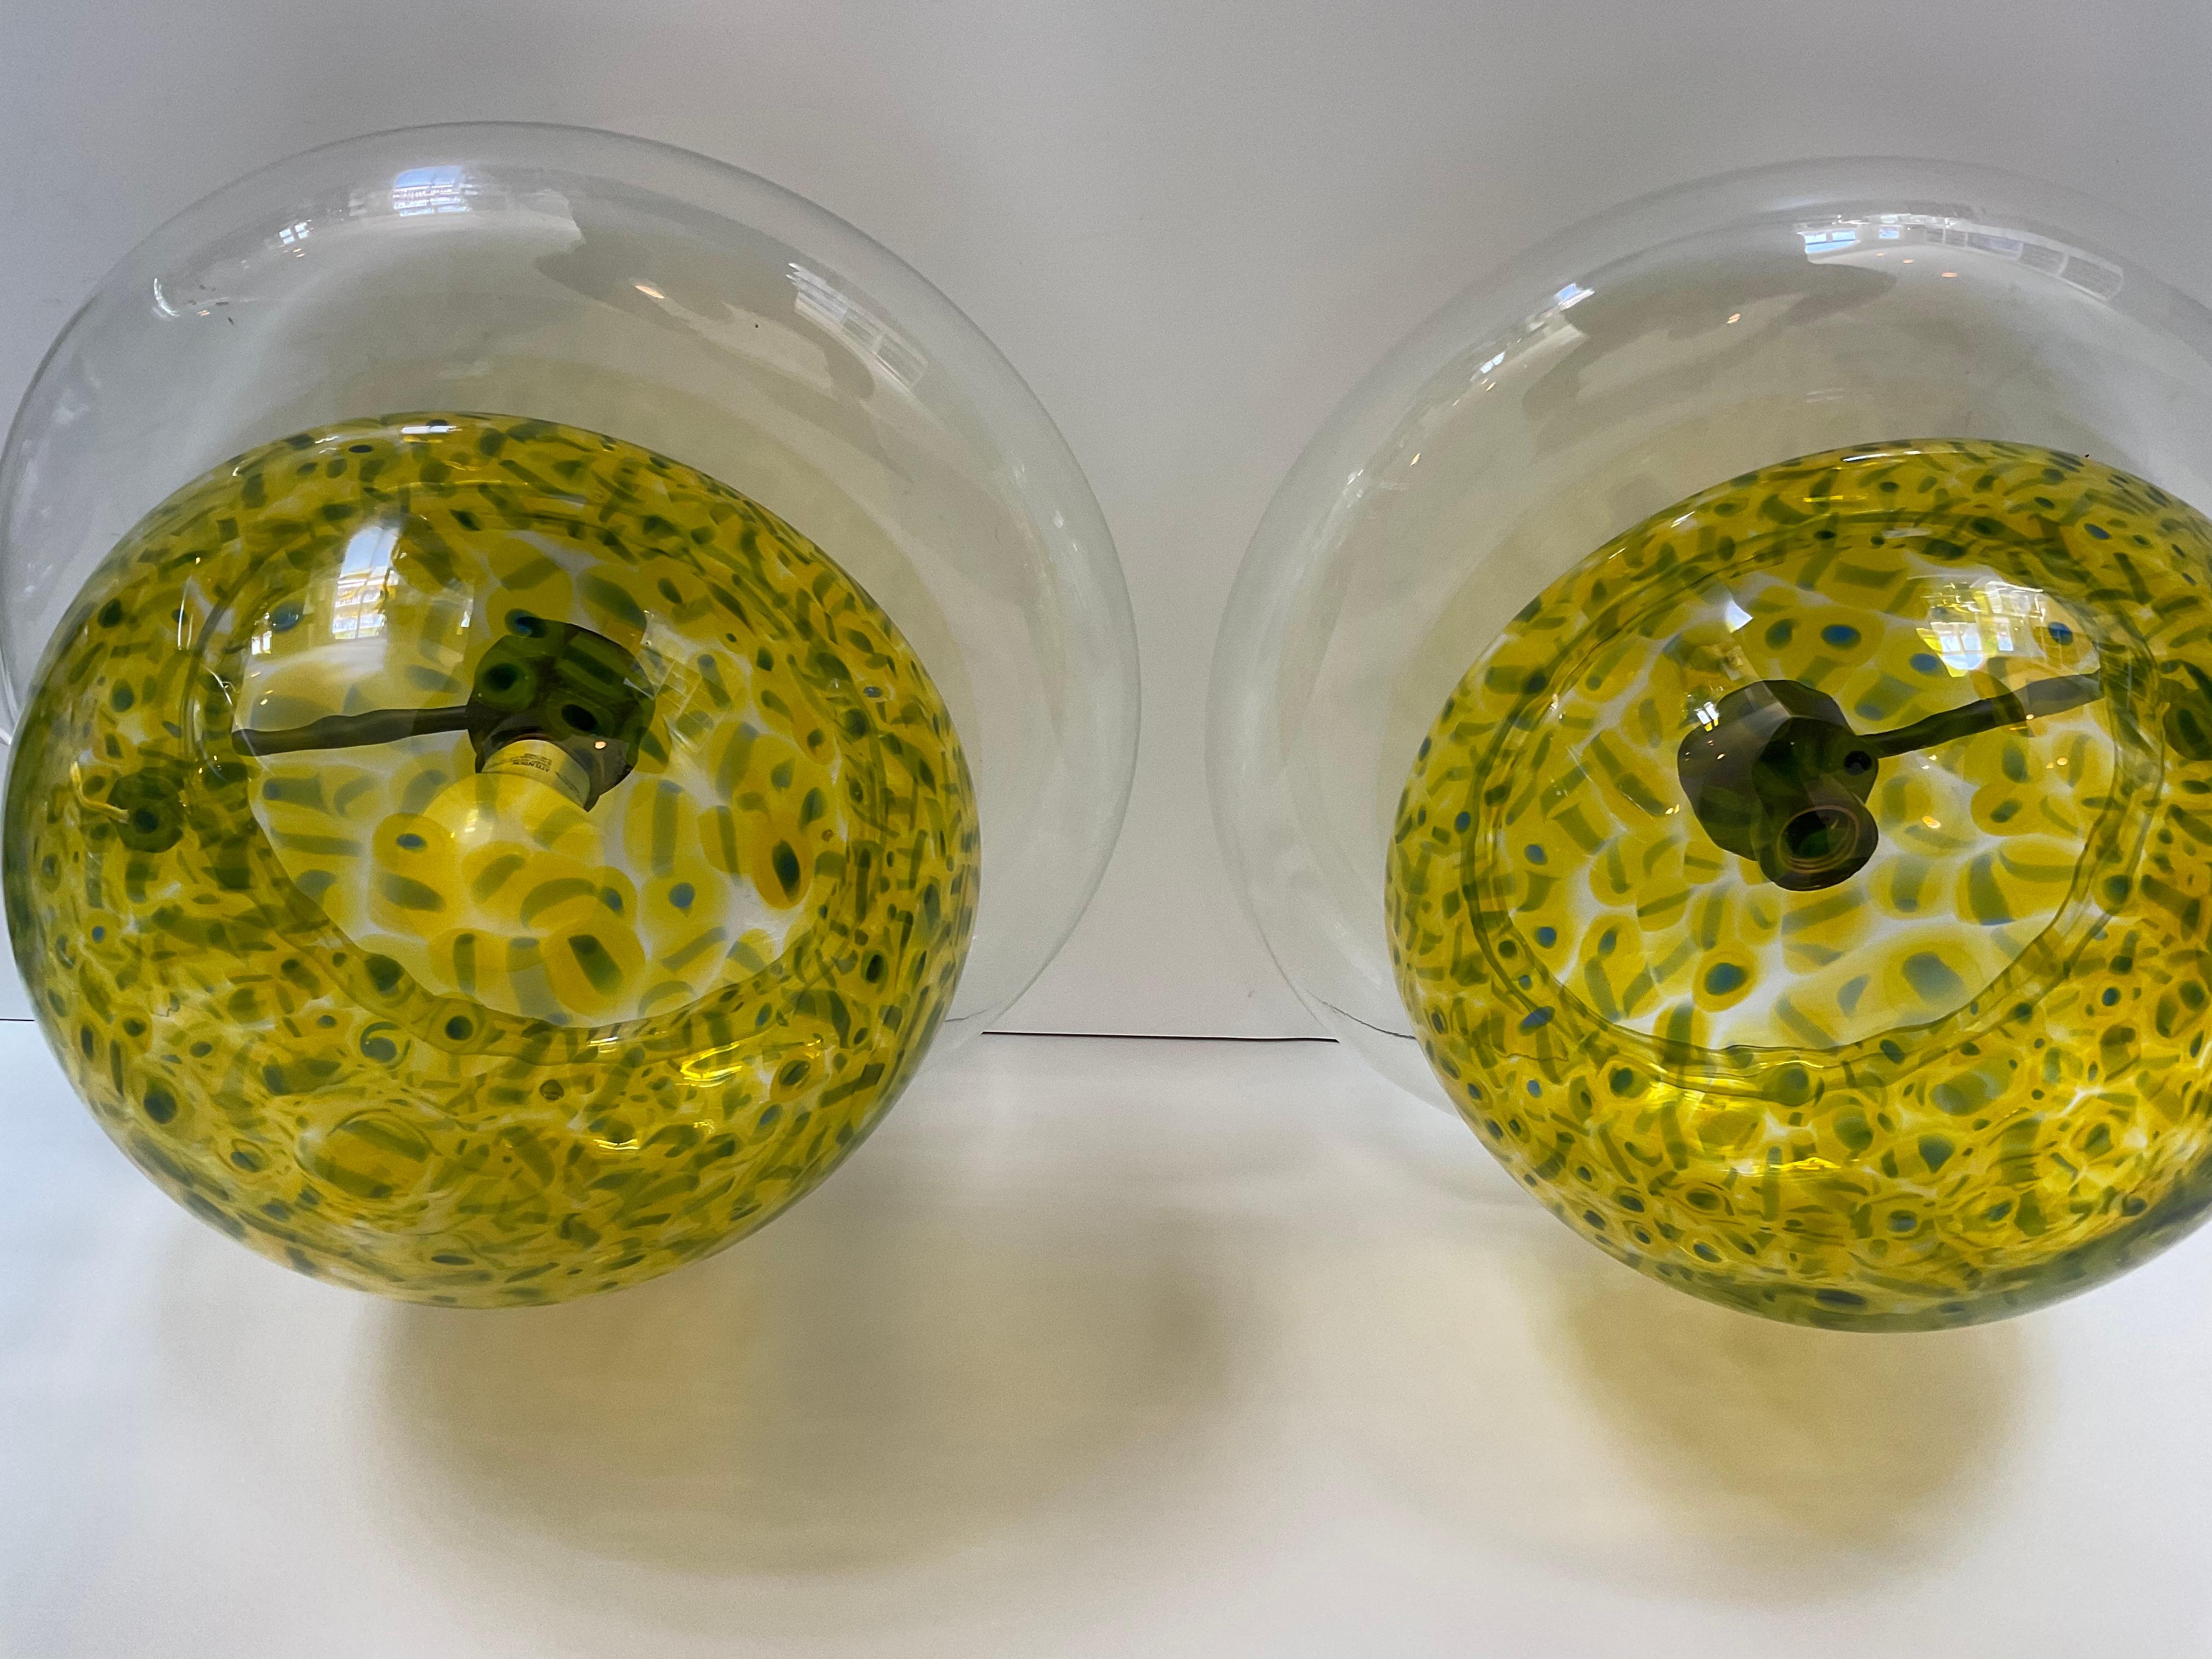 Rare Pair of Vistosi Poveglia Murrine table lamps in vibrant yellow. These lamps were designed by Gae Aulenti and are seldom seen on the open market. Finding a pair is virtually impossible. These lamps are new old stock and have been in storage